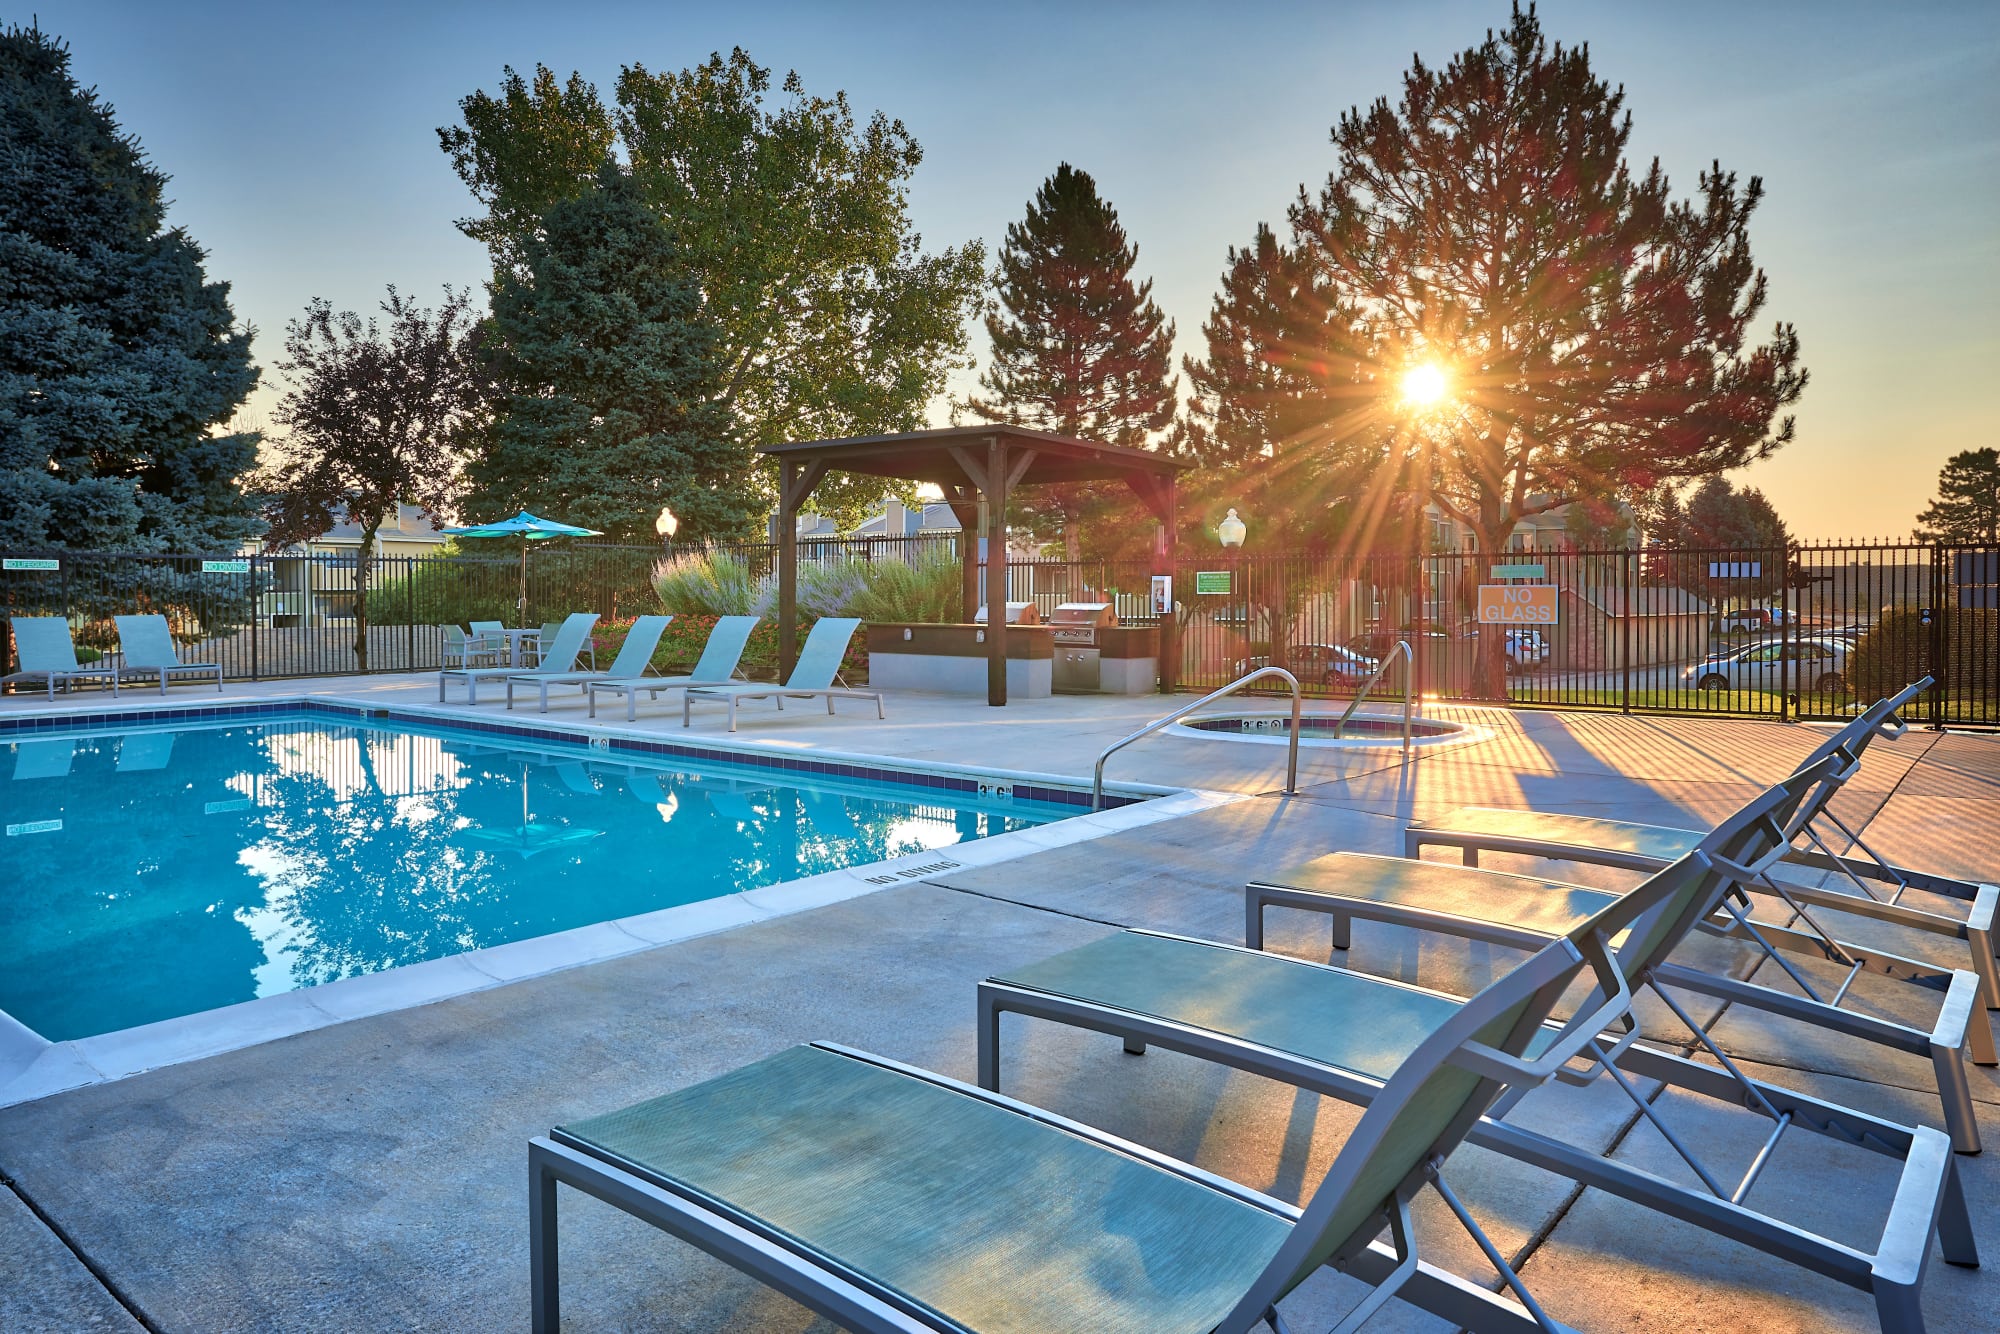 Swimming pool with lounge chairs at sunset at Alton Green Apartments in Denver, Colorado